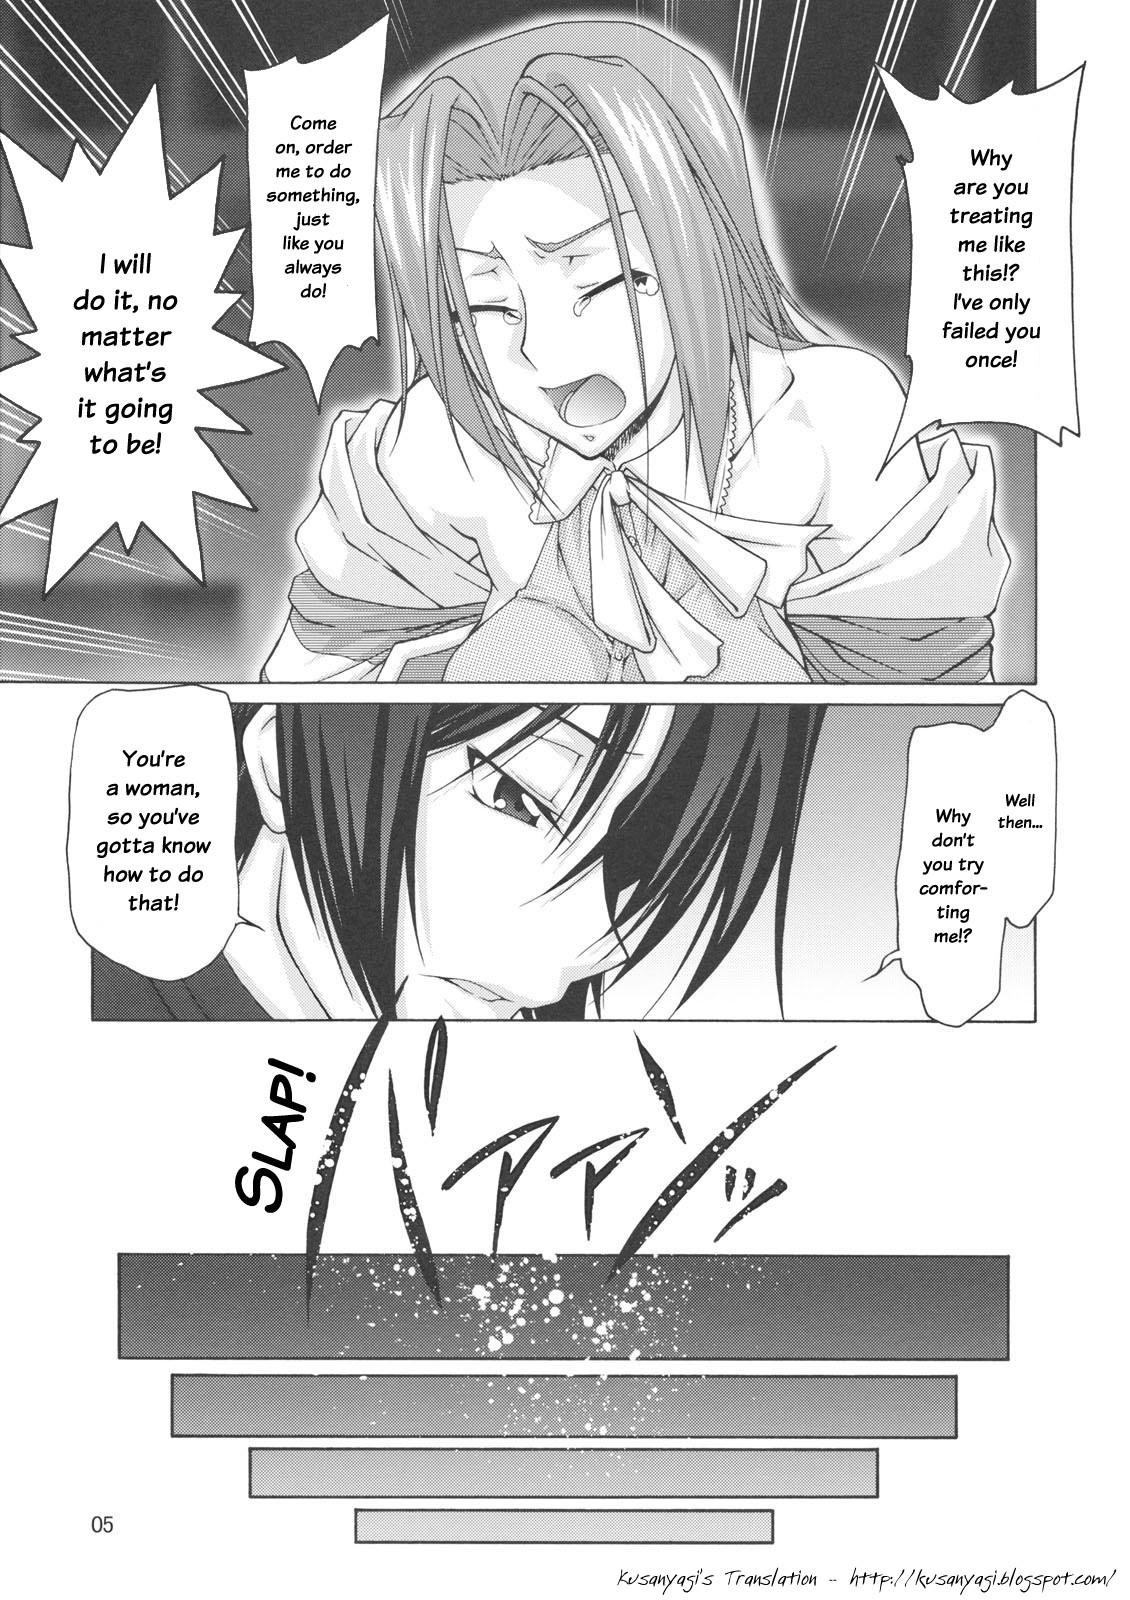 Buttfucking C:GGRR2:03 - Code geass Spoon - Page 4